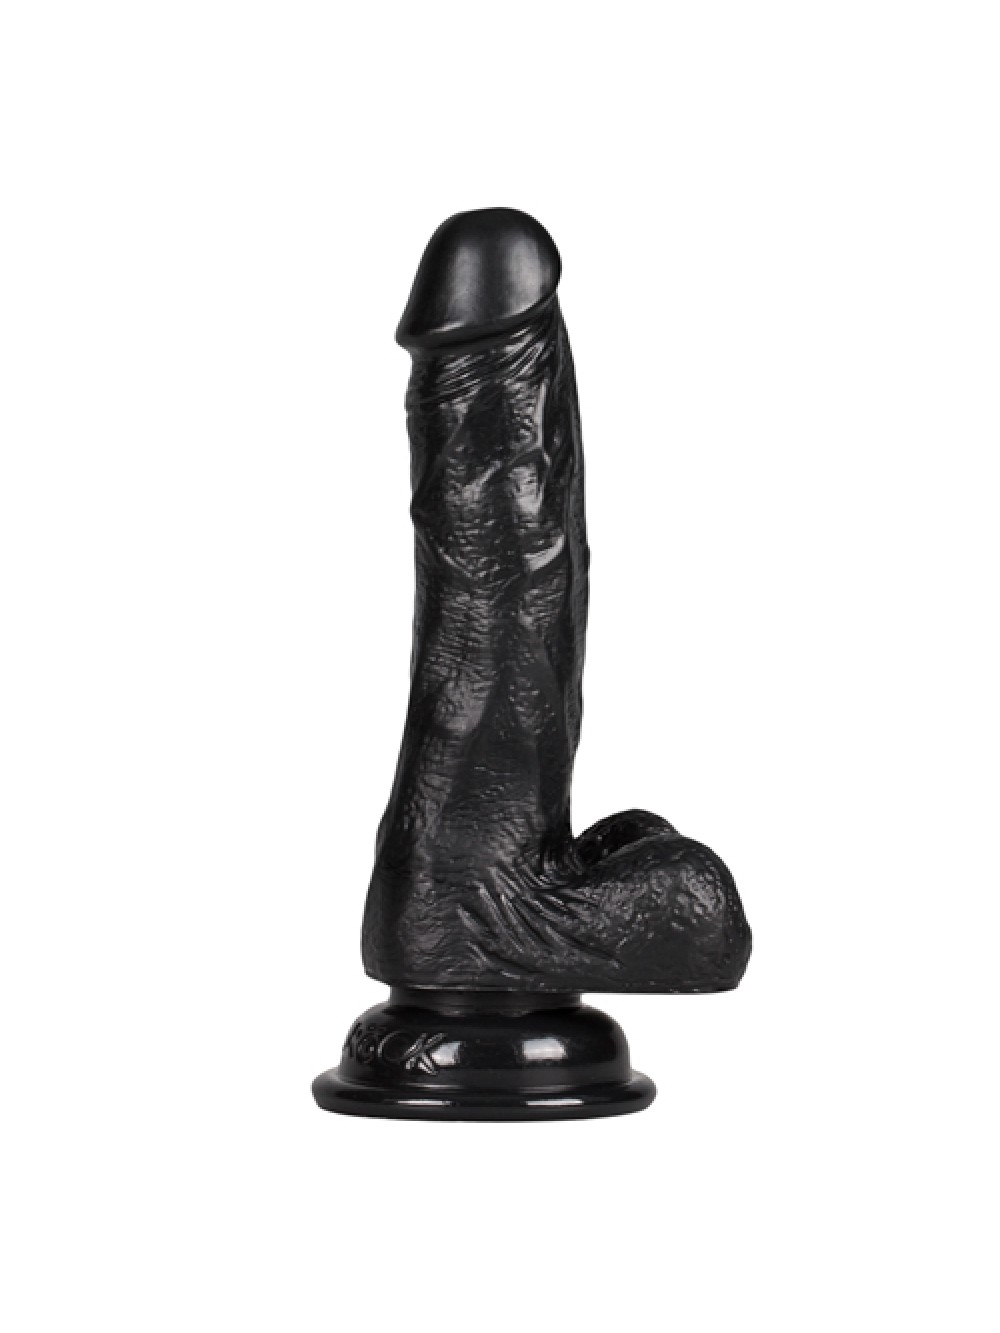 Realistic 7 Inch Dildo With Strap-On Harness